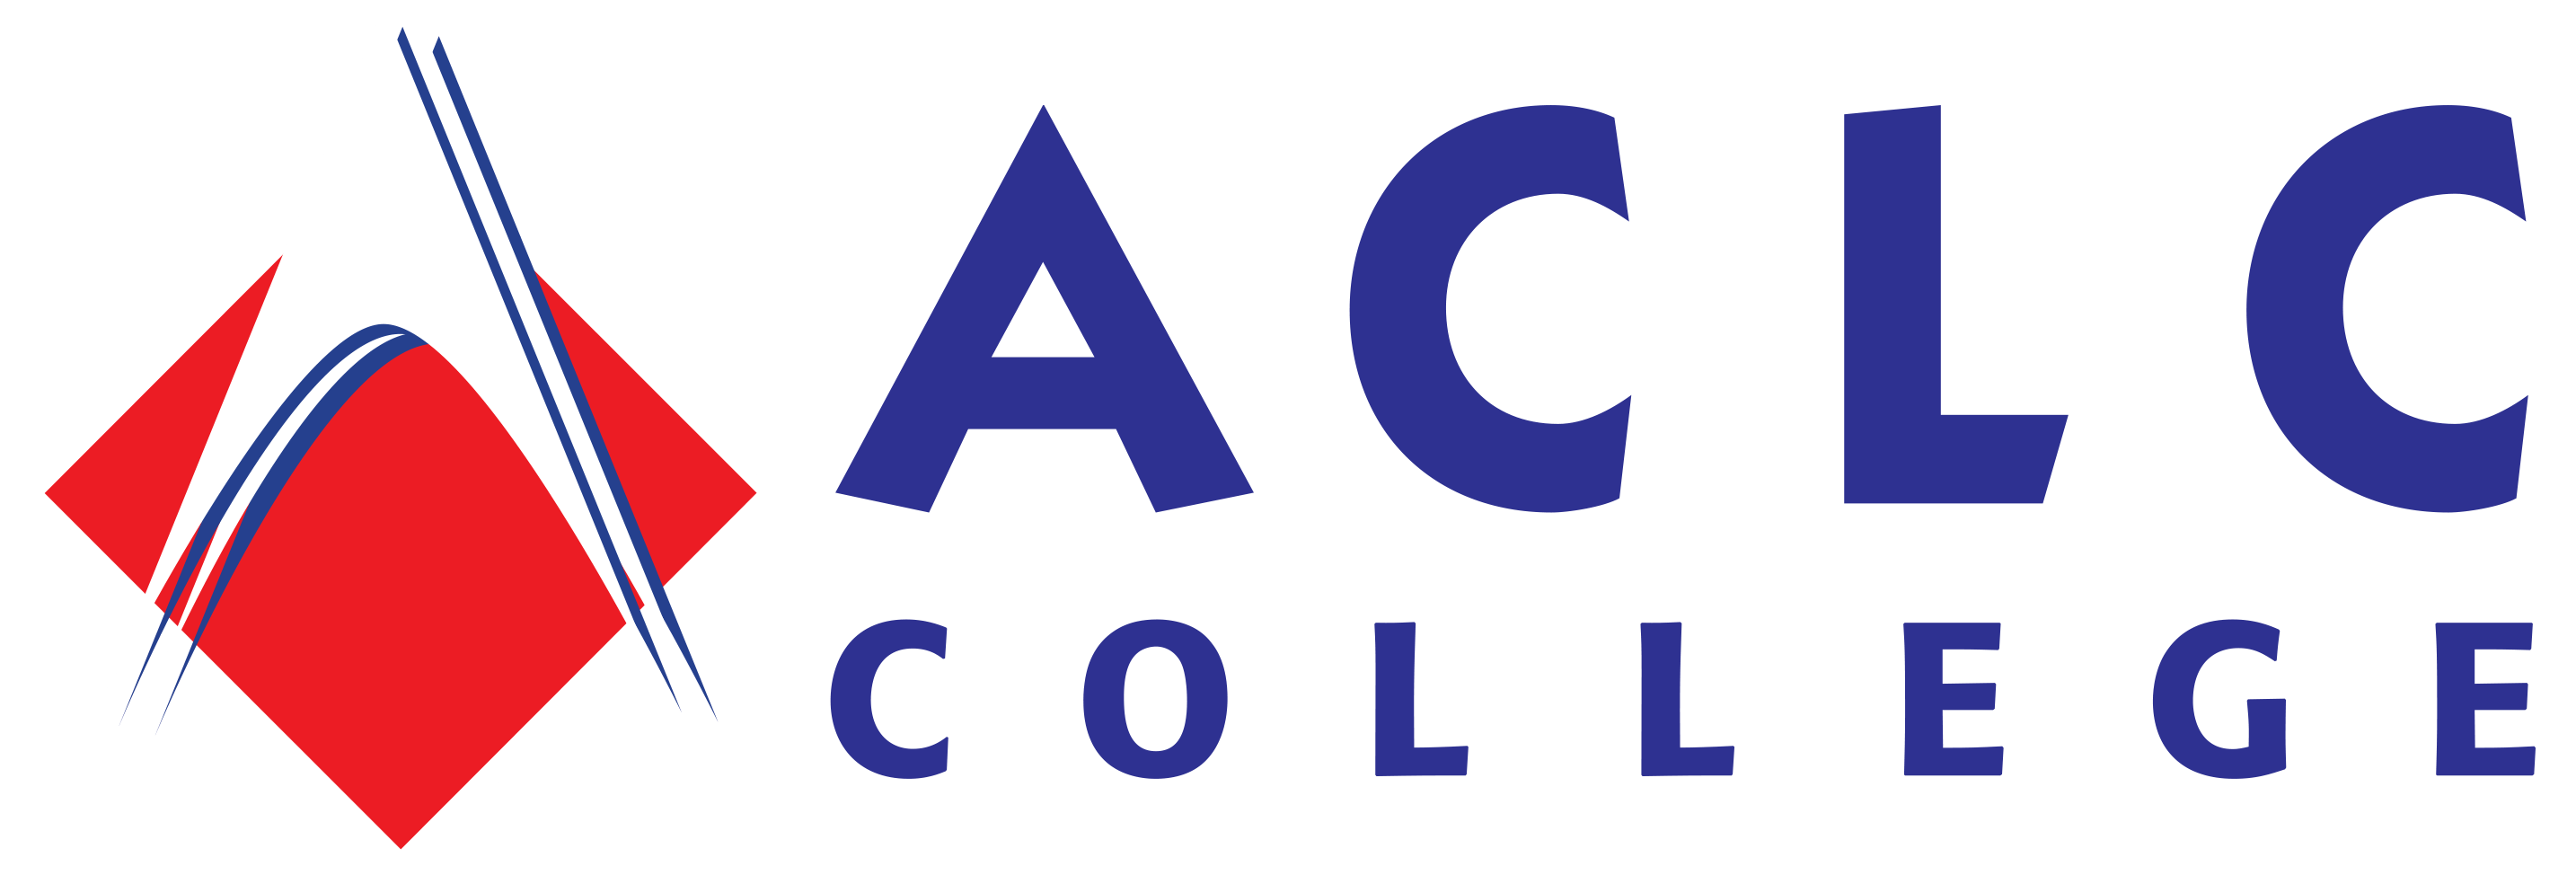 ACLC Logo - ACLC COLLEGE DAET CAMPUS | HOME